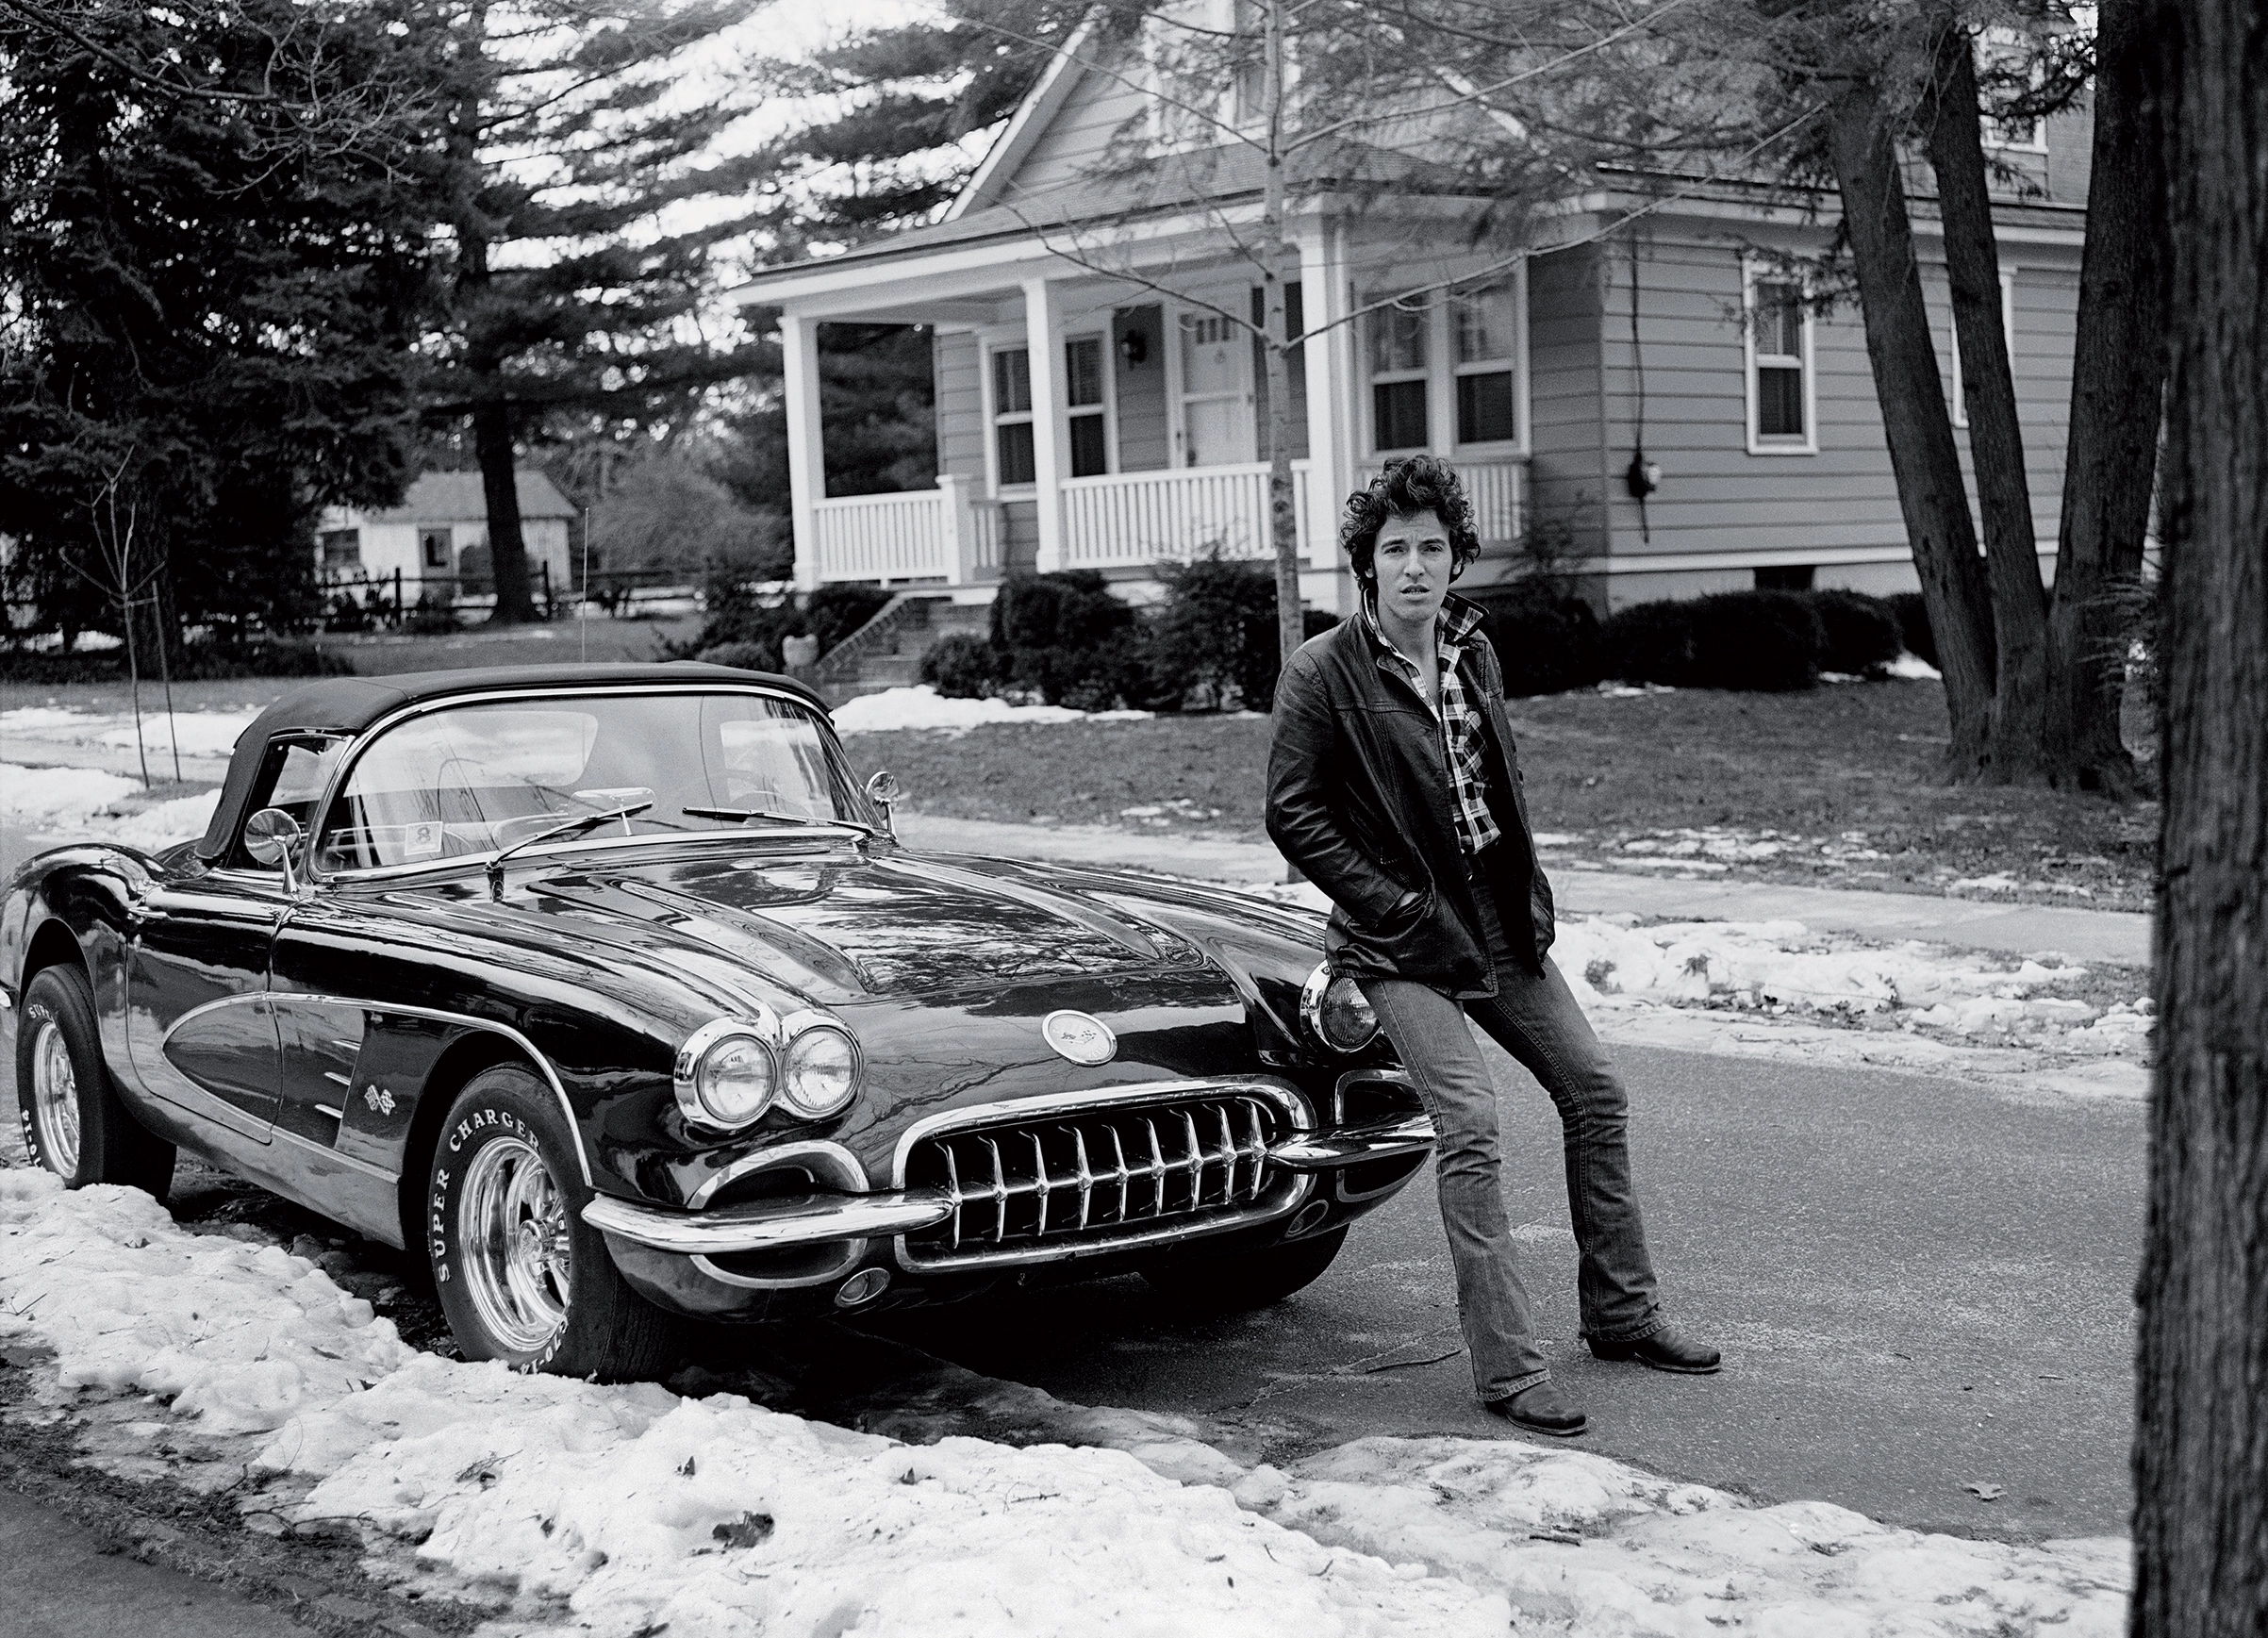 2405x1737 Bruce Springsteen: Pictures by Frank Stefanko Capture 'Grit' | Time